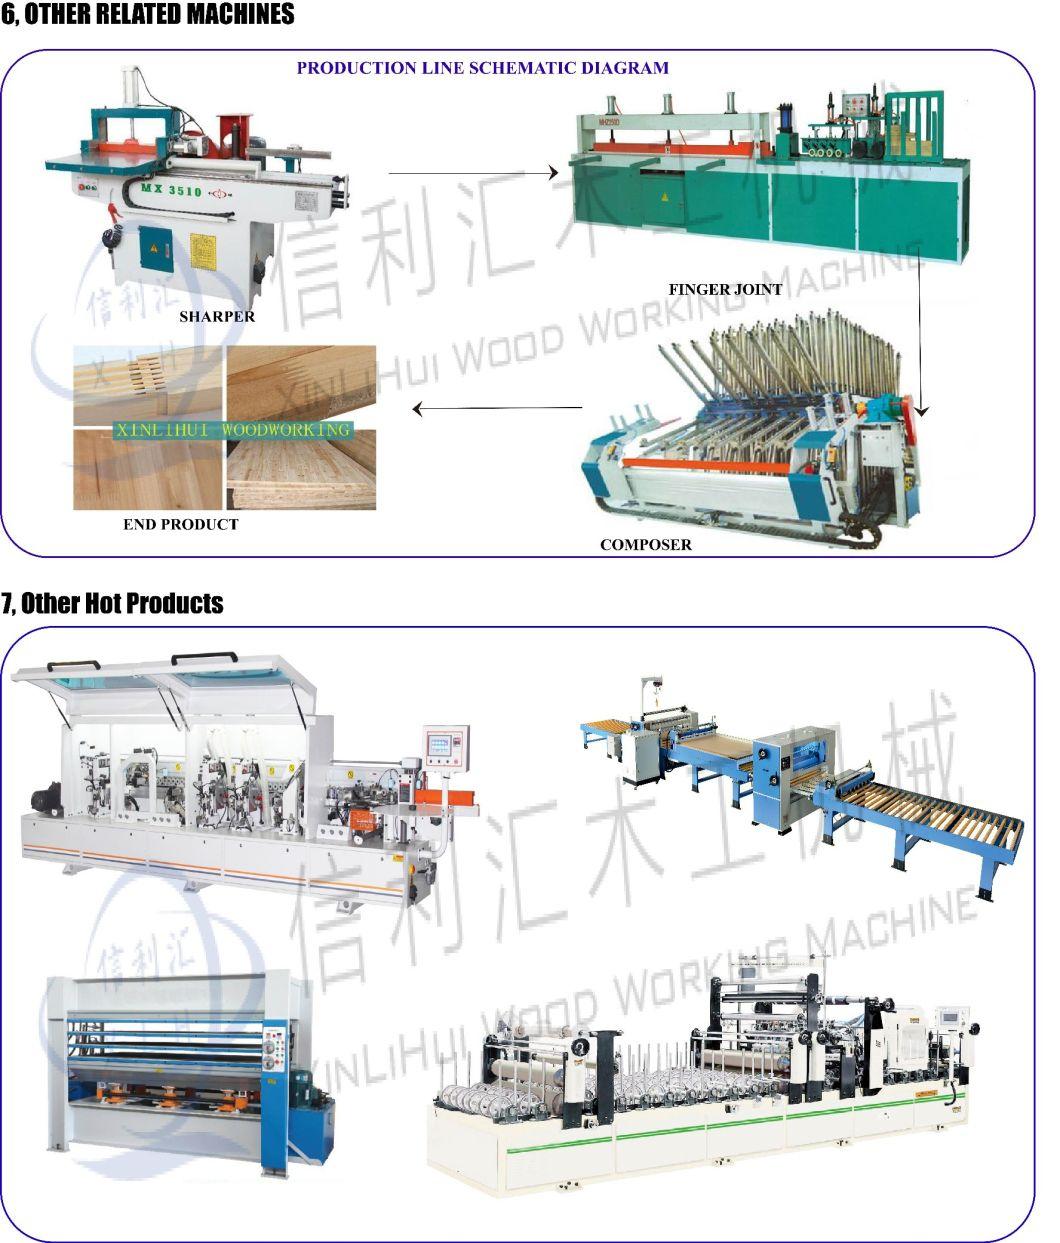 Round Pine Spruce Wood Log Saw Cutting / Slicing Machine Wood Multi Blades Saw Machine for Small Logs / Square Wood Cutting to Take out Wood Sheets or Boards